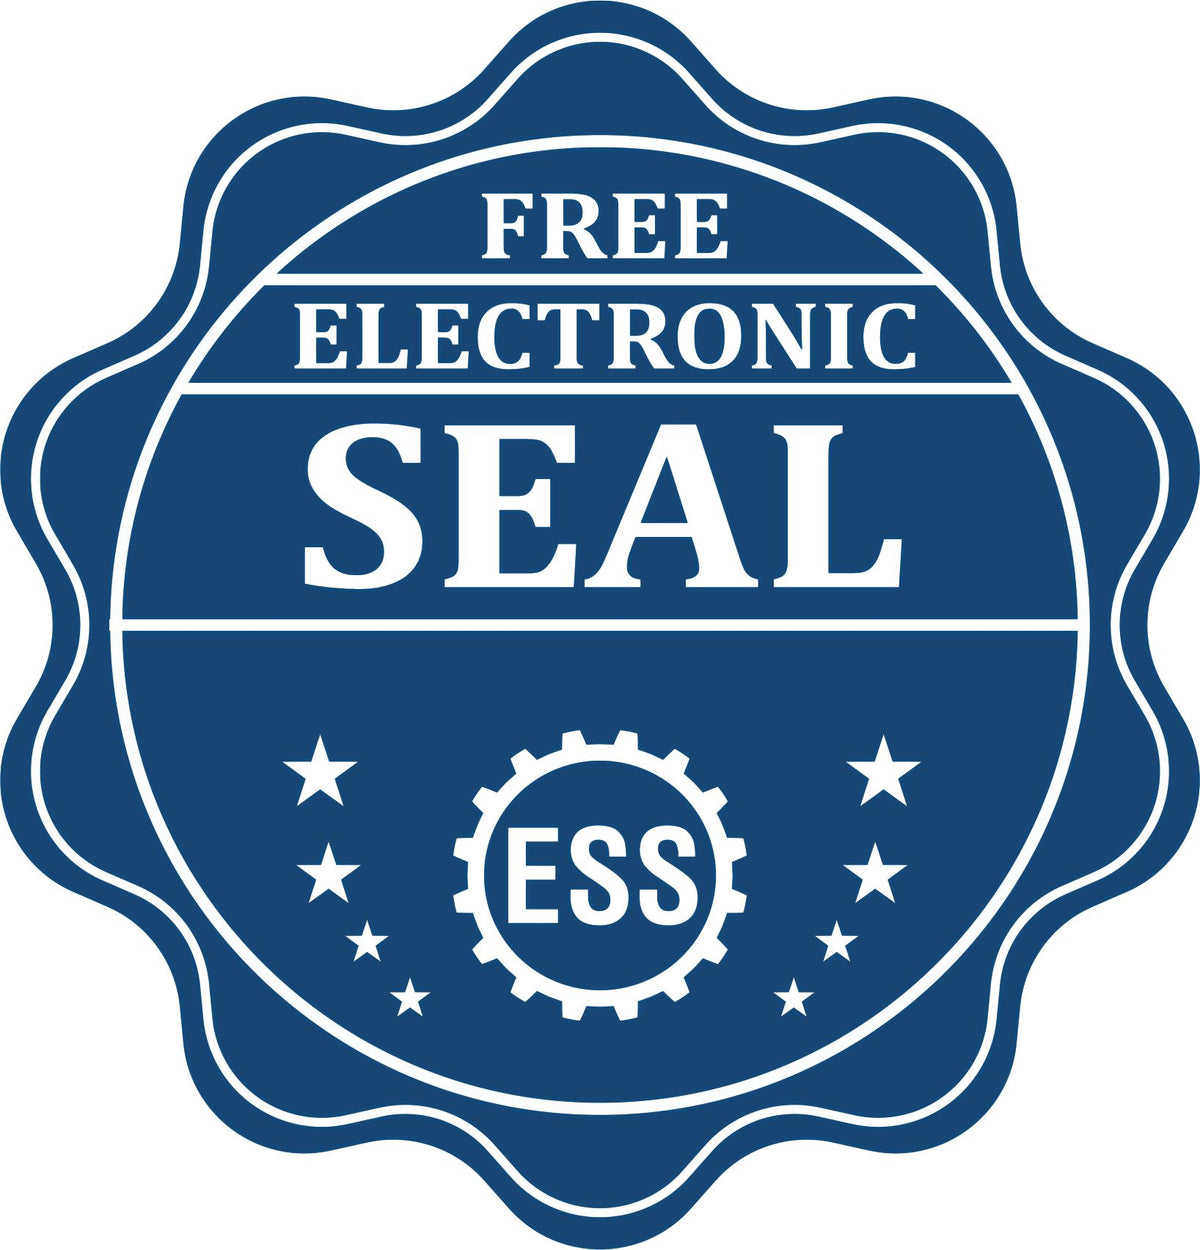 A badge showing a free electronic seal for the Heavy-Duty North Dakota Rectangular Notary Stamp with stars and the ESS gear on the emblem.